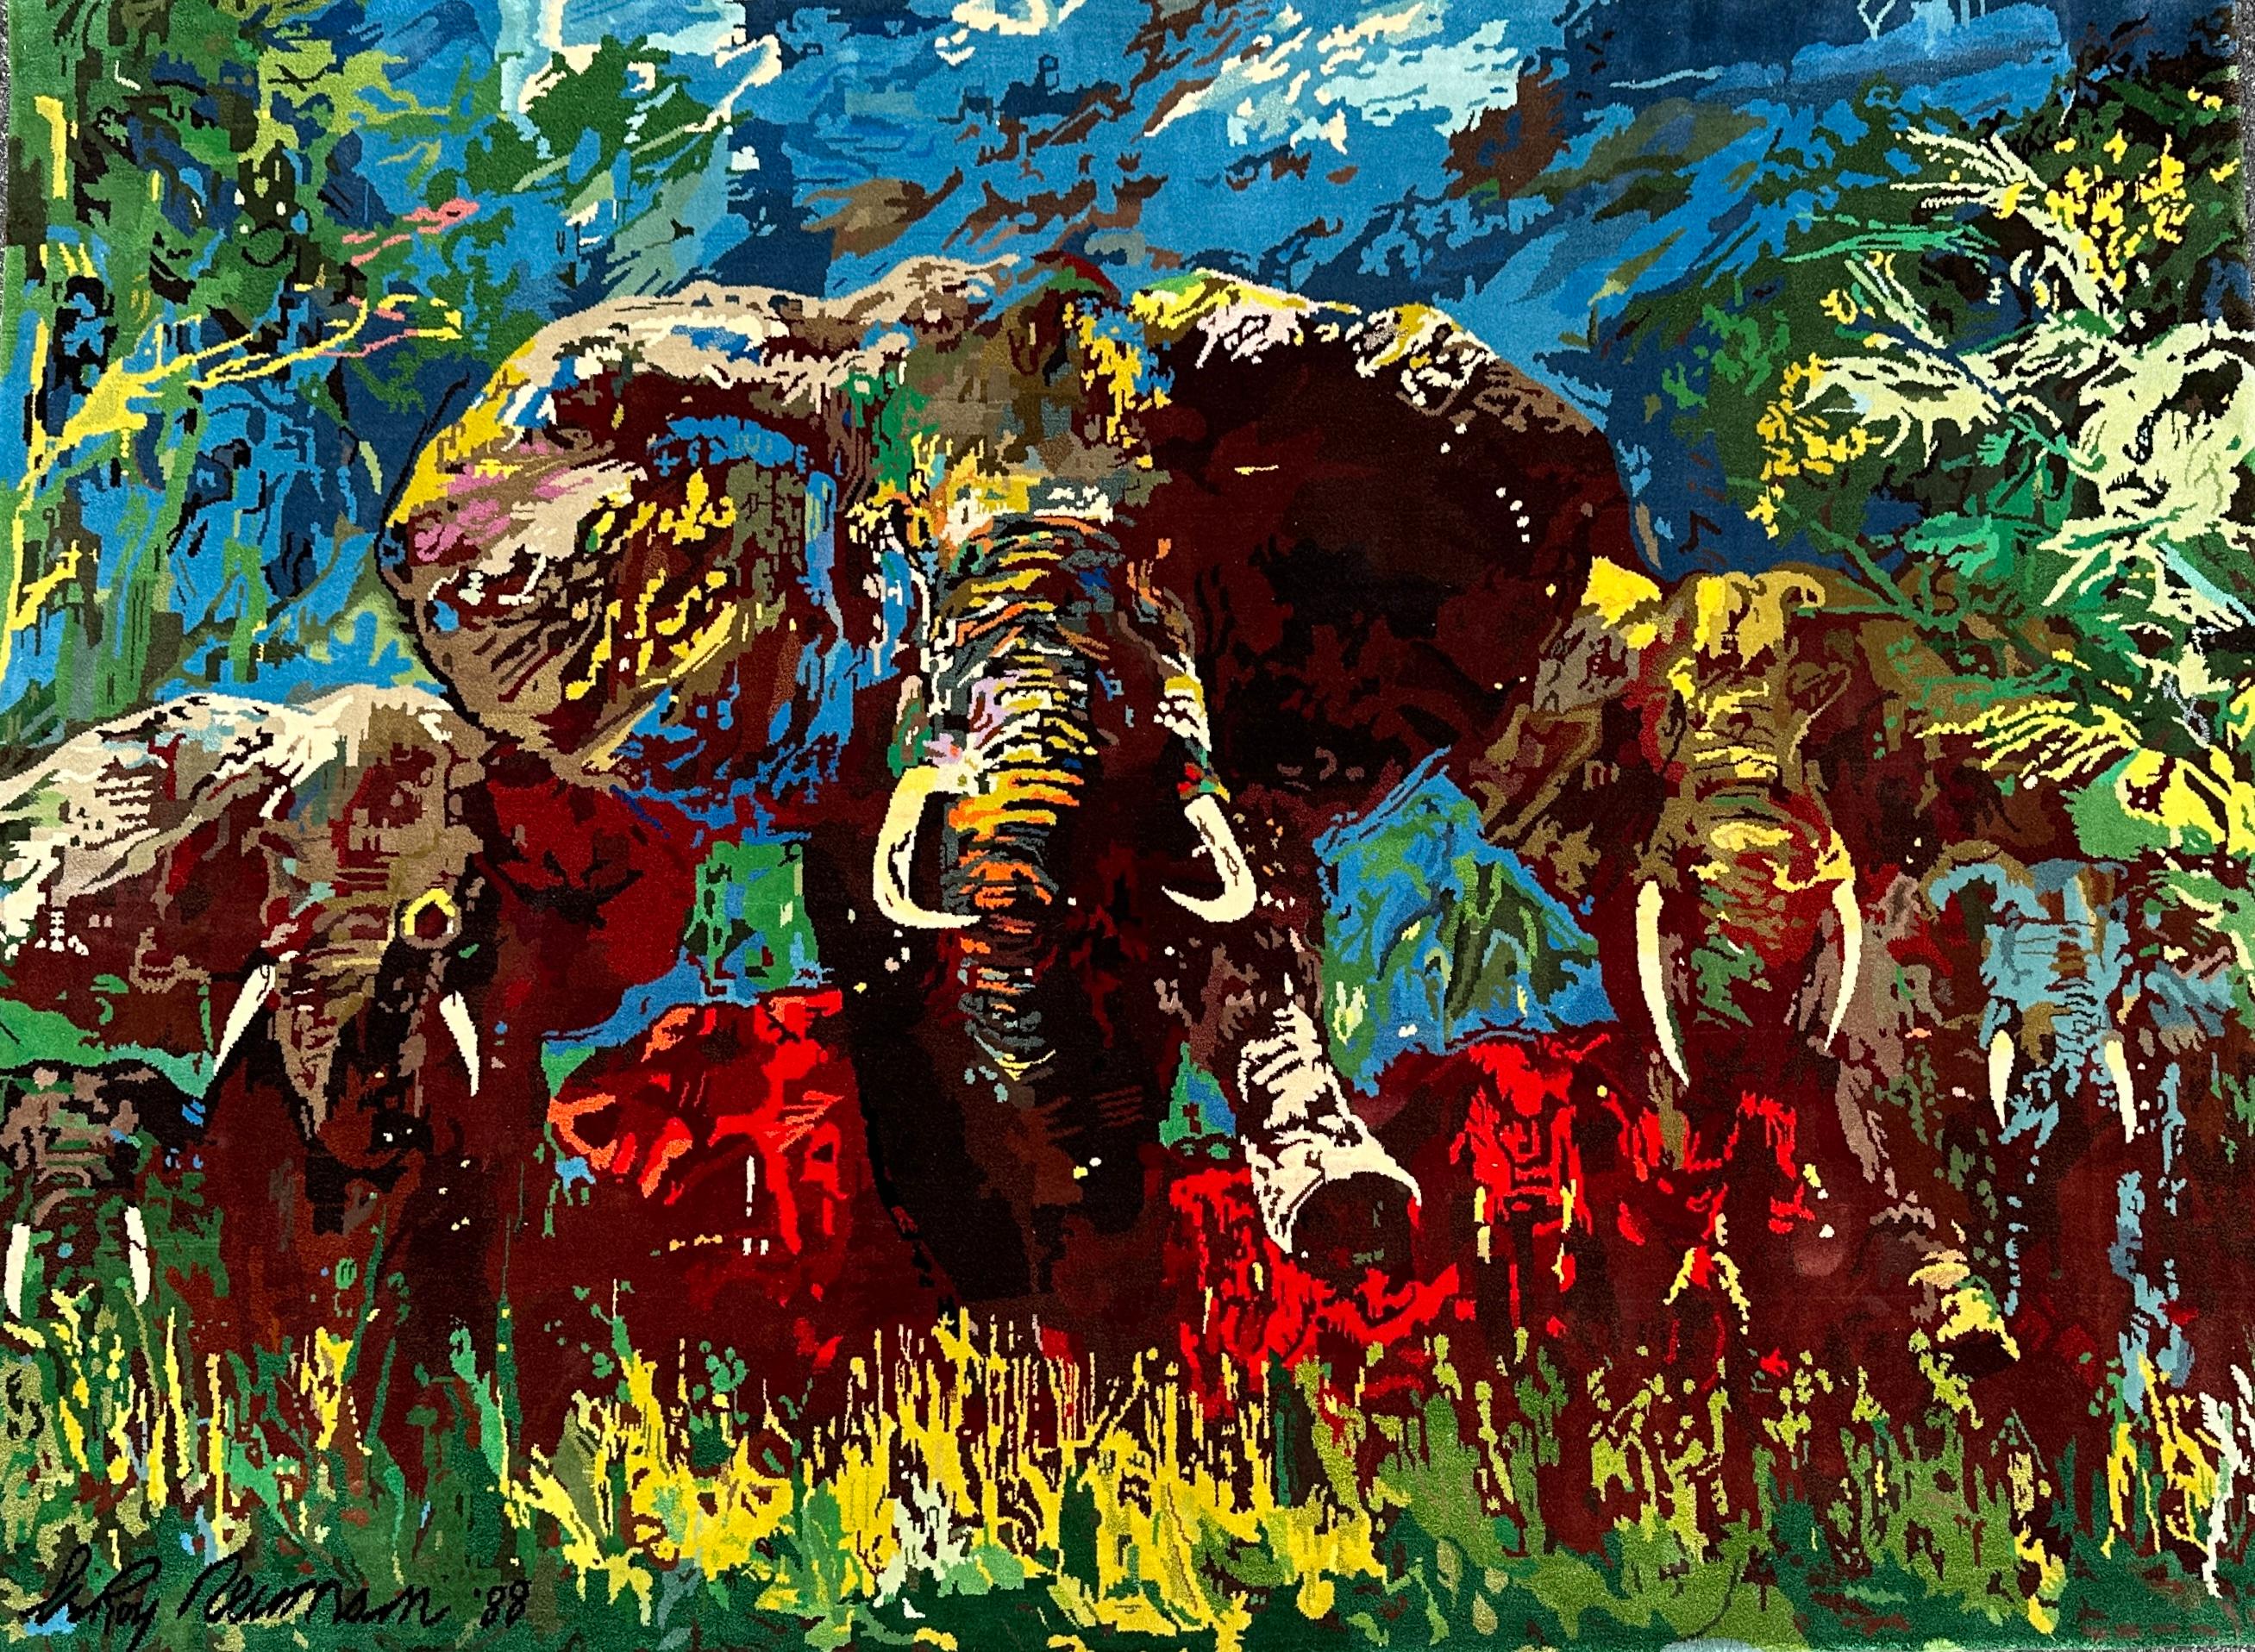 LeRoy Neiman (American, 1921-2012) Elephant  Stampede Silk Tapestry, hand signed.
59 x 80 inches (149.9 x  203.2 cm) 
From and edition of  36/88.
Published by  Knoedler Publishing, New York.